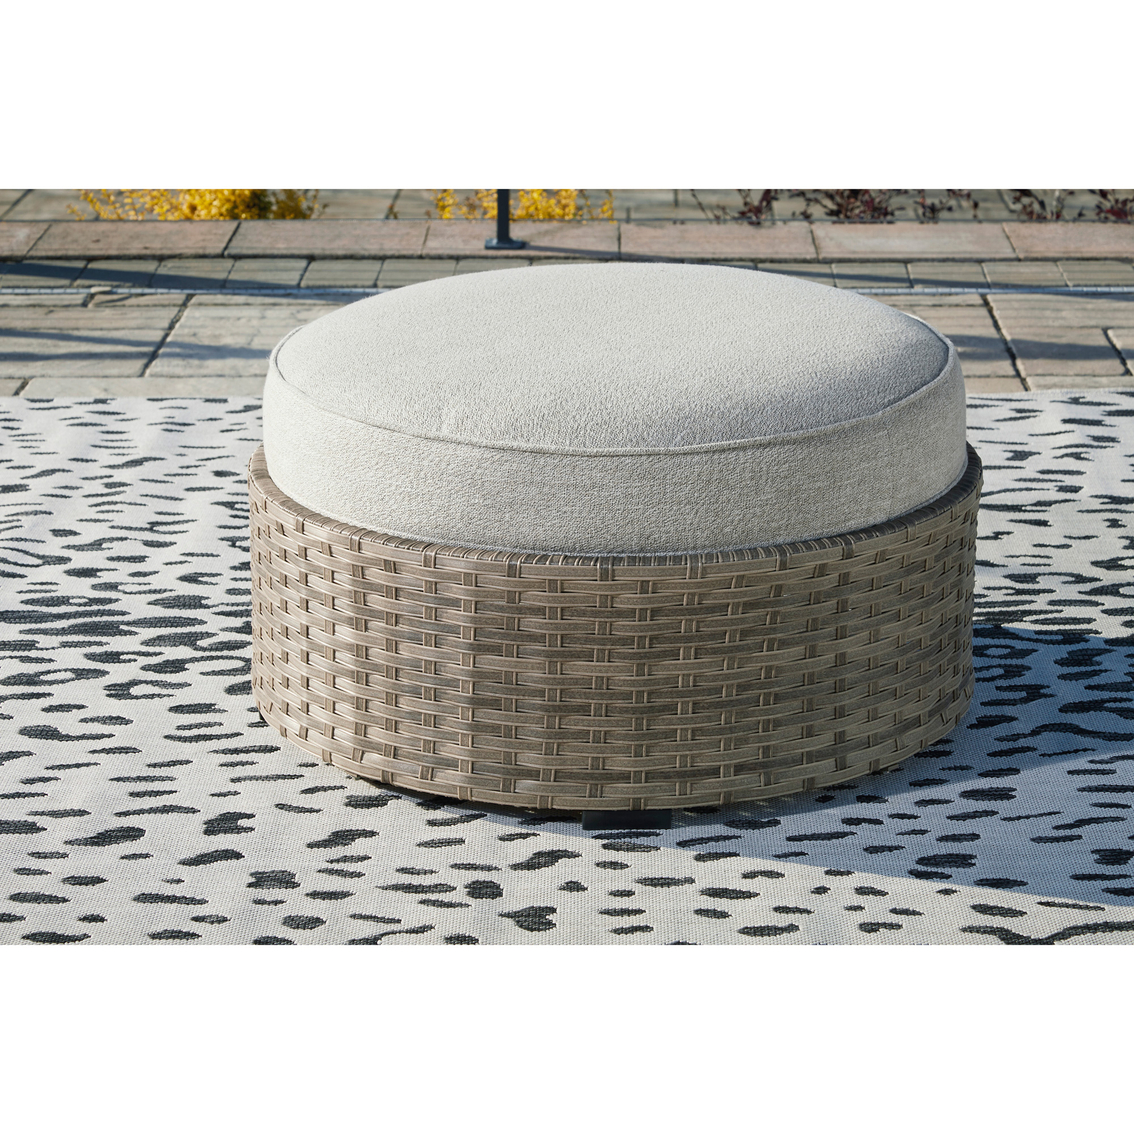 Signature Design by Ashley Calworth Outdoor Sectional 8 pc. Set - Image 6 of 6